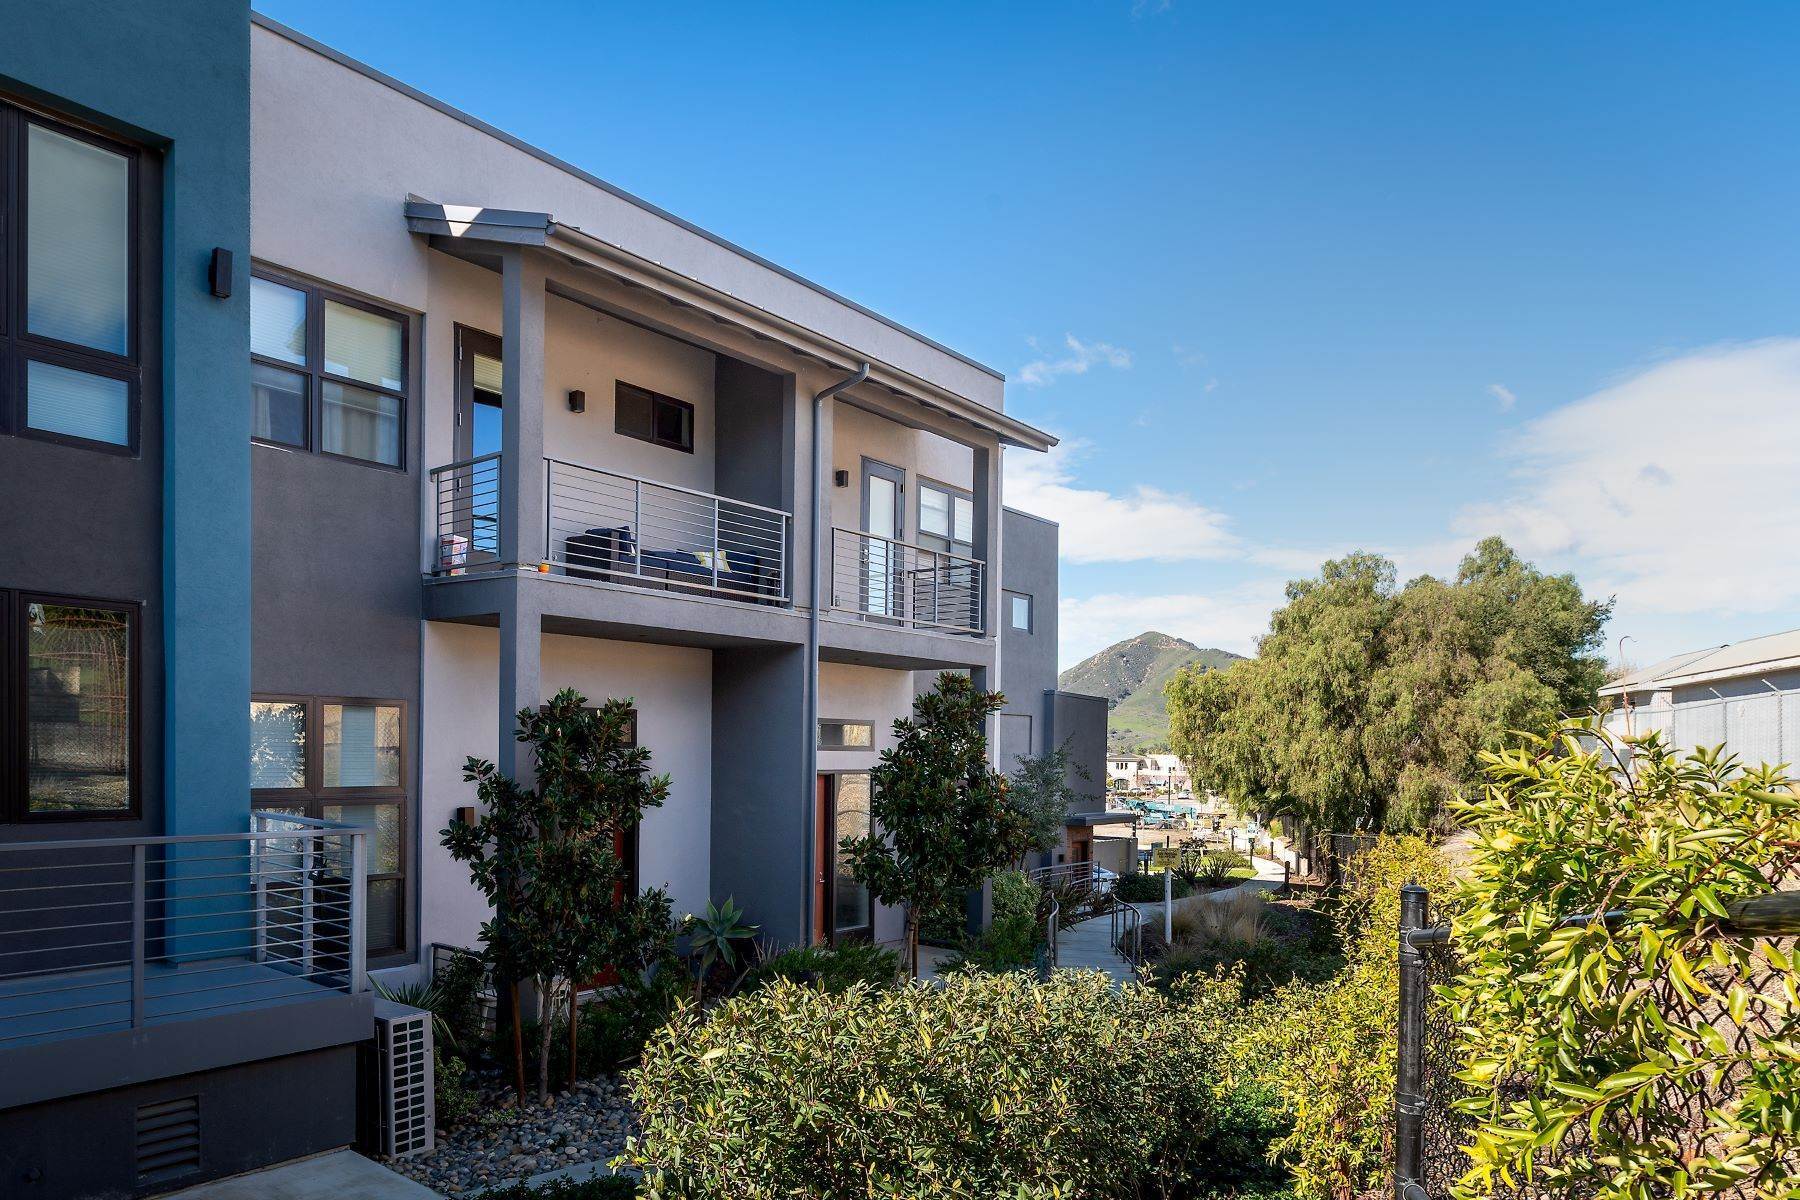 Townhouse for Sale at Upscale residence in The Yard, an urban loft-style community! 2478 Victoria Avenue San Luis Obispo, California 93401 United States